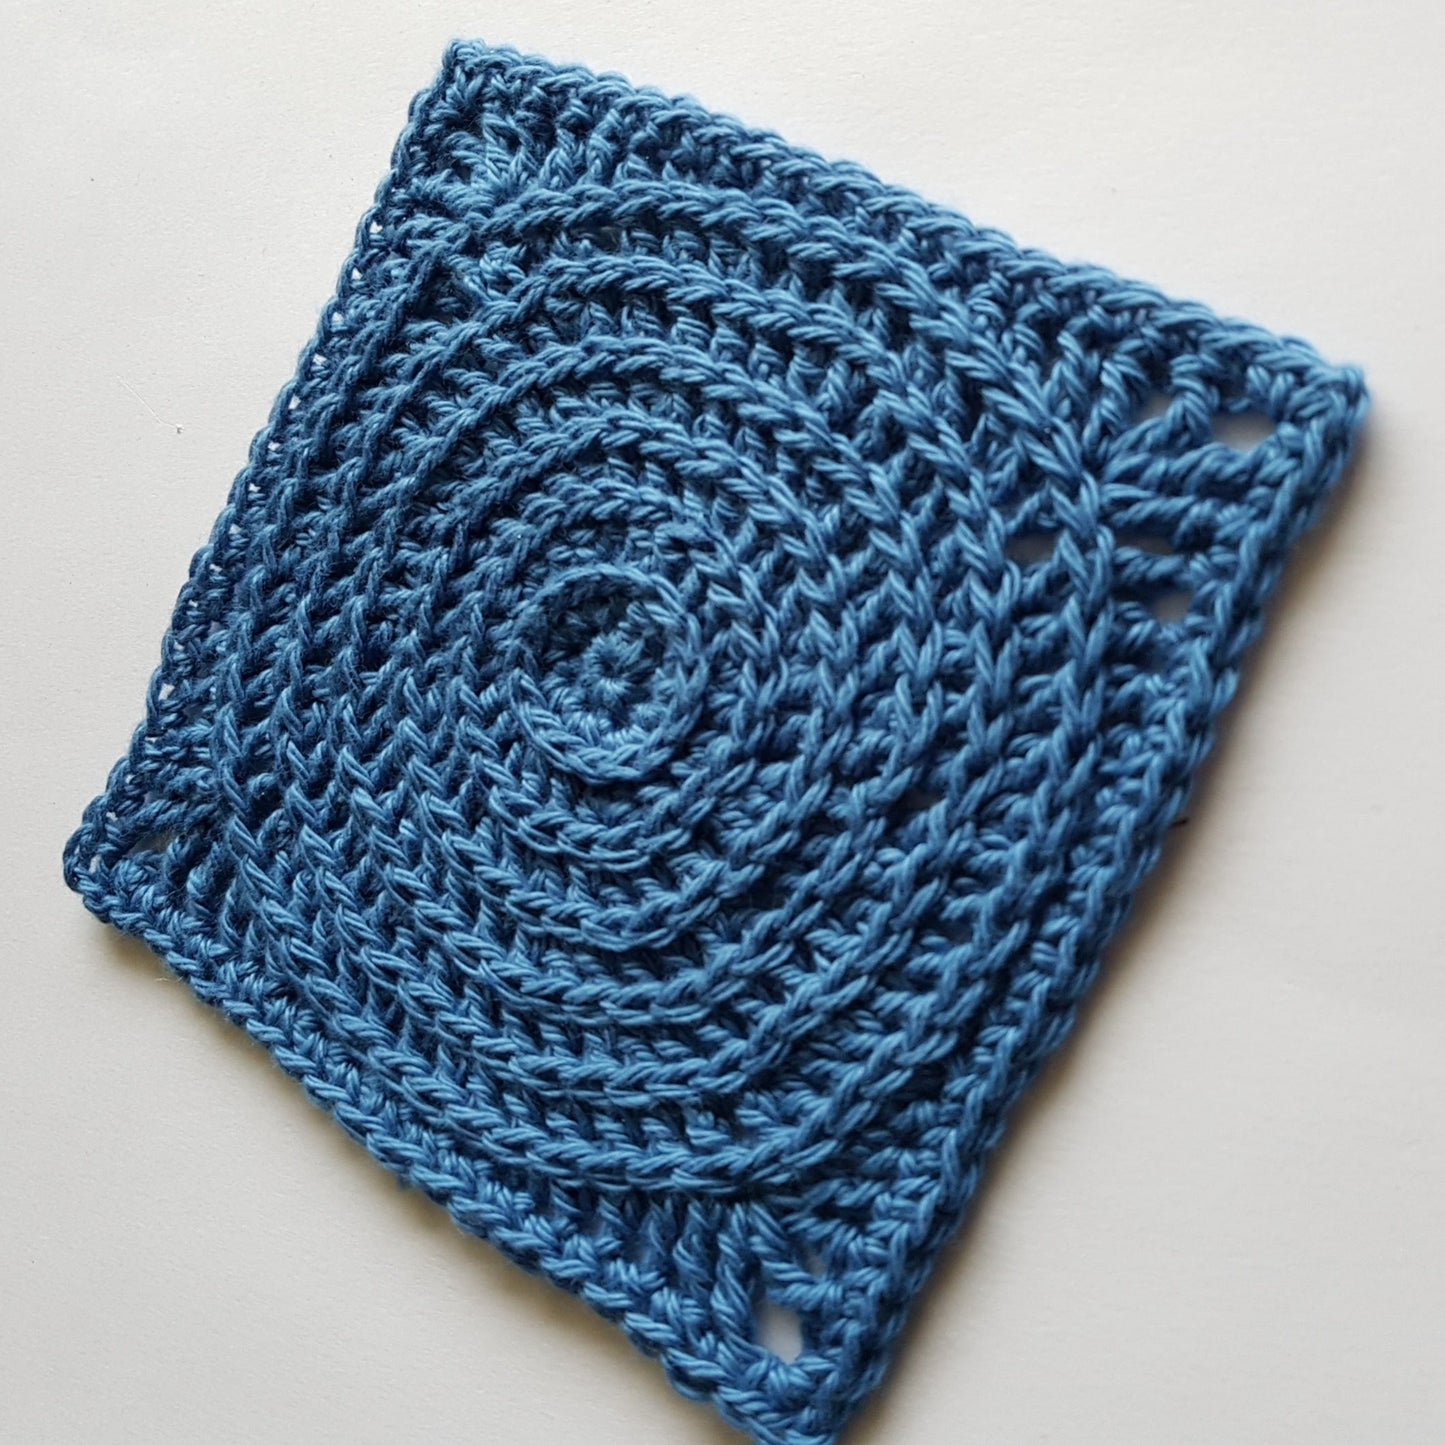 Carpentaria in single colour blue by Shelley Husband